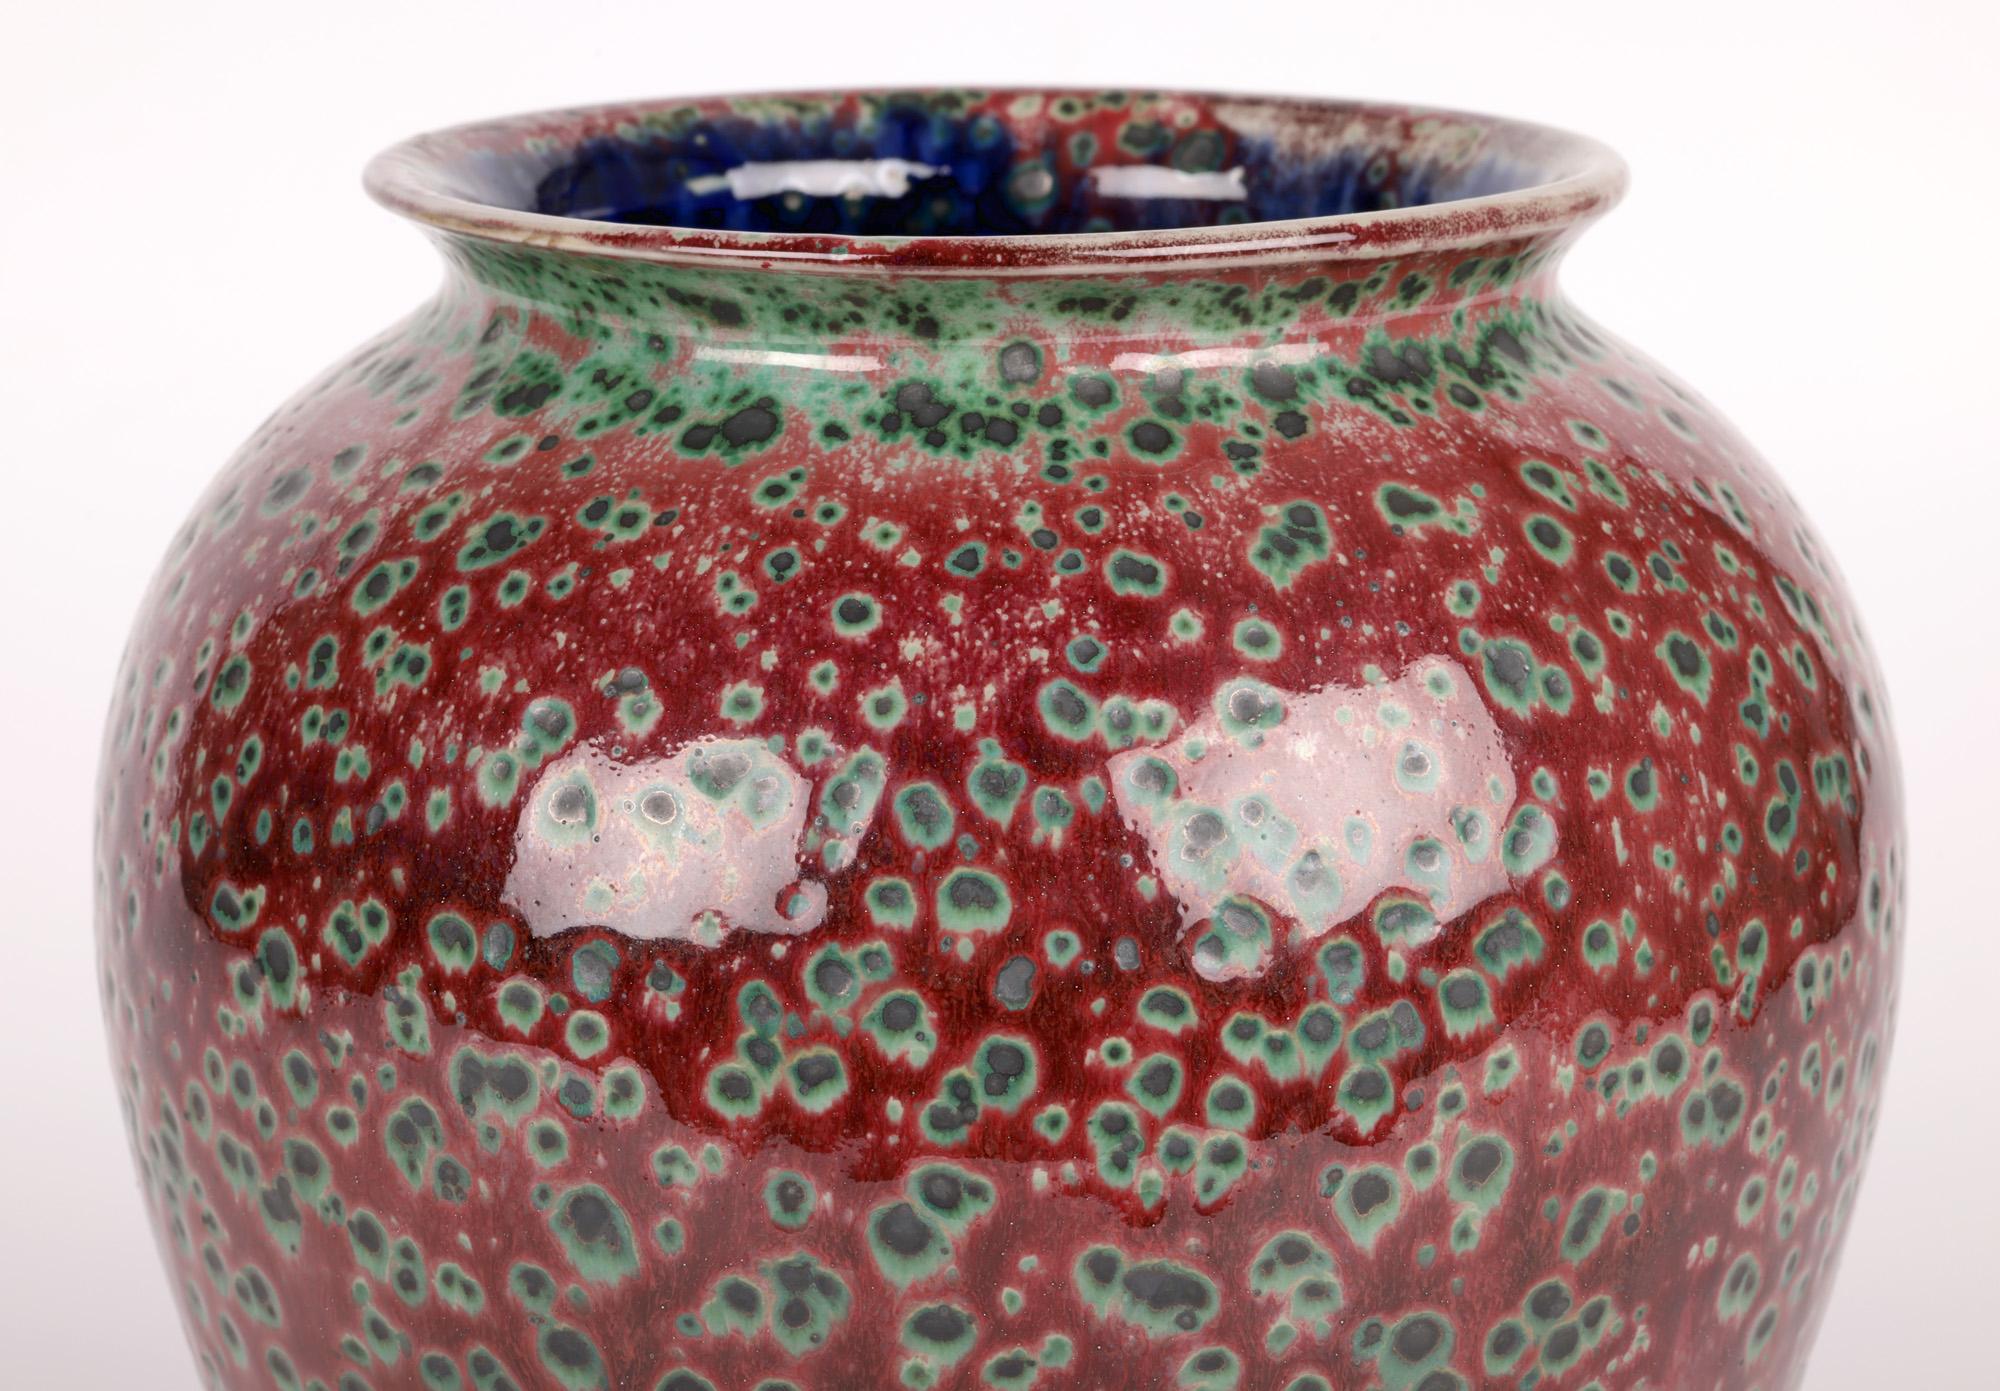 An exceptional, impressive unique Cobridge pottery ruskin glazed vase by Anita Harris and glazed by Justin Emery and dating from around 2000. The large round bulbous stoneware vase stands on a round skirted base with a widening round body and short